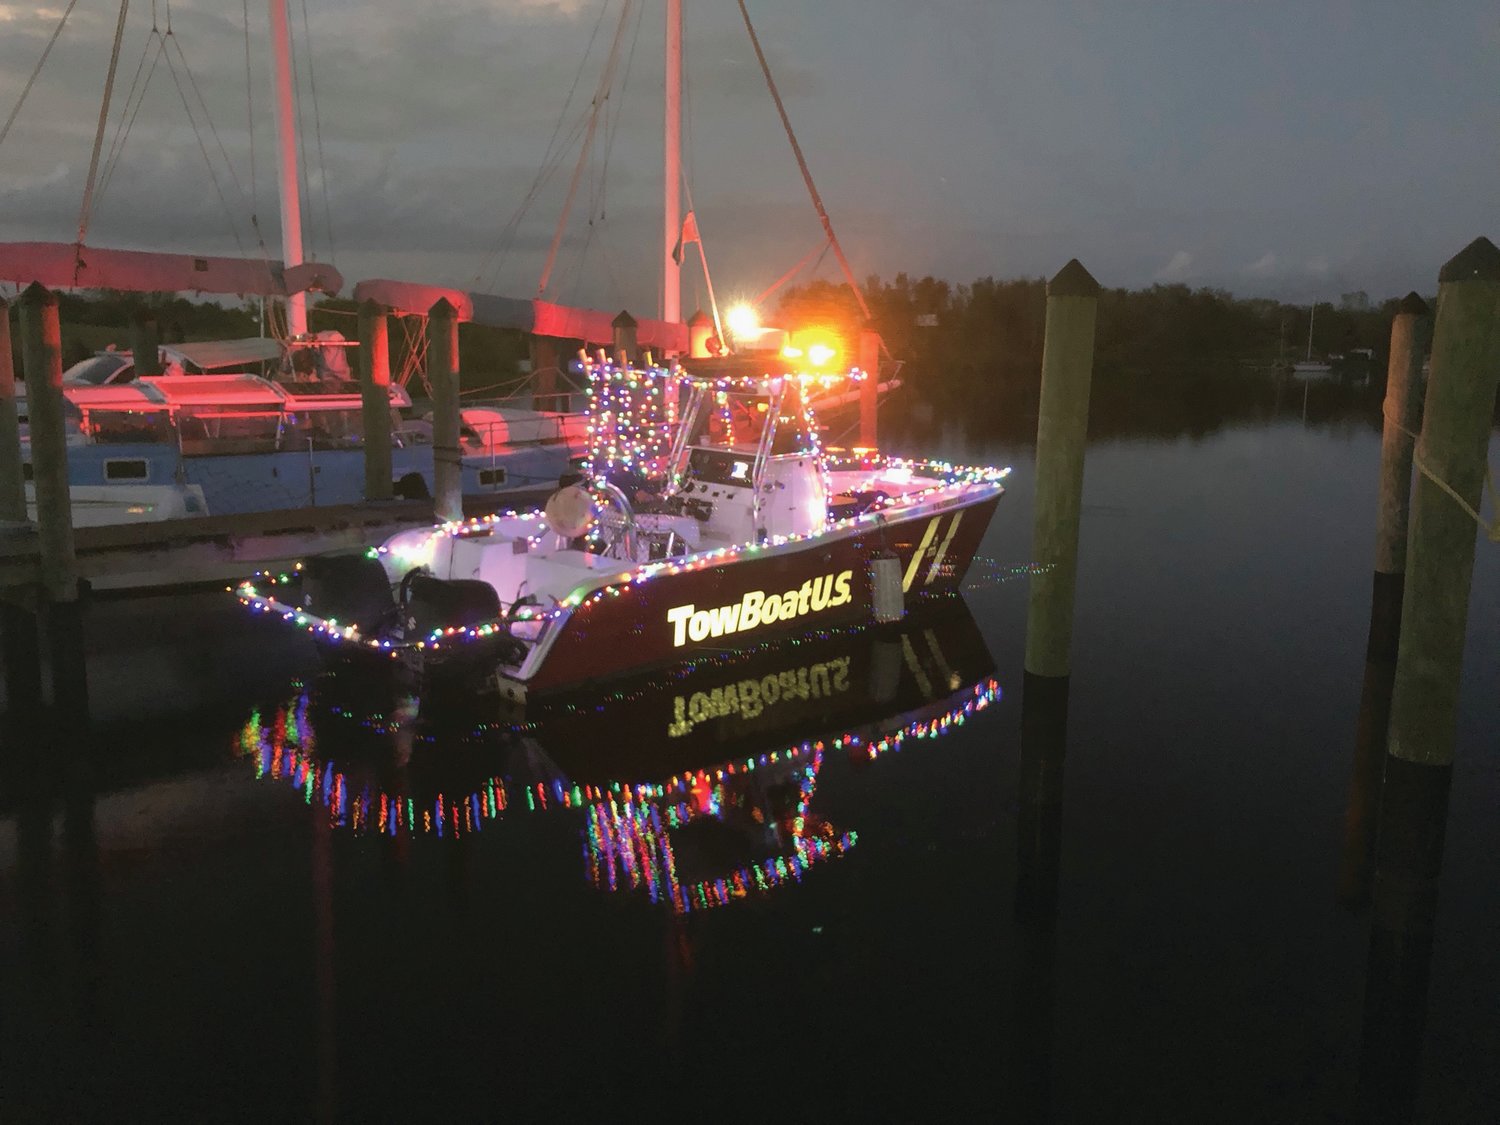 LABELLE – East Coast Marine sponsored a LaBelle Christmas Boat Parade Dec. 18. The parade started at Barron Park and went up to Caloosa Estates Drive, turned around and went back to the Hendry County Boat Dock. Spectators on the bank enjoyed the holiday lights as they reflected on the waters of the Caloosahatchee River. [Photo courtesy of East Coast Marine